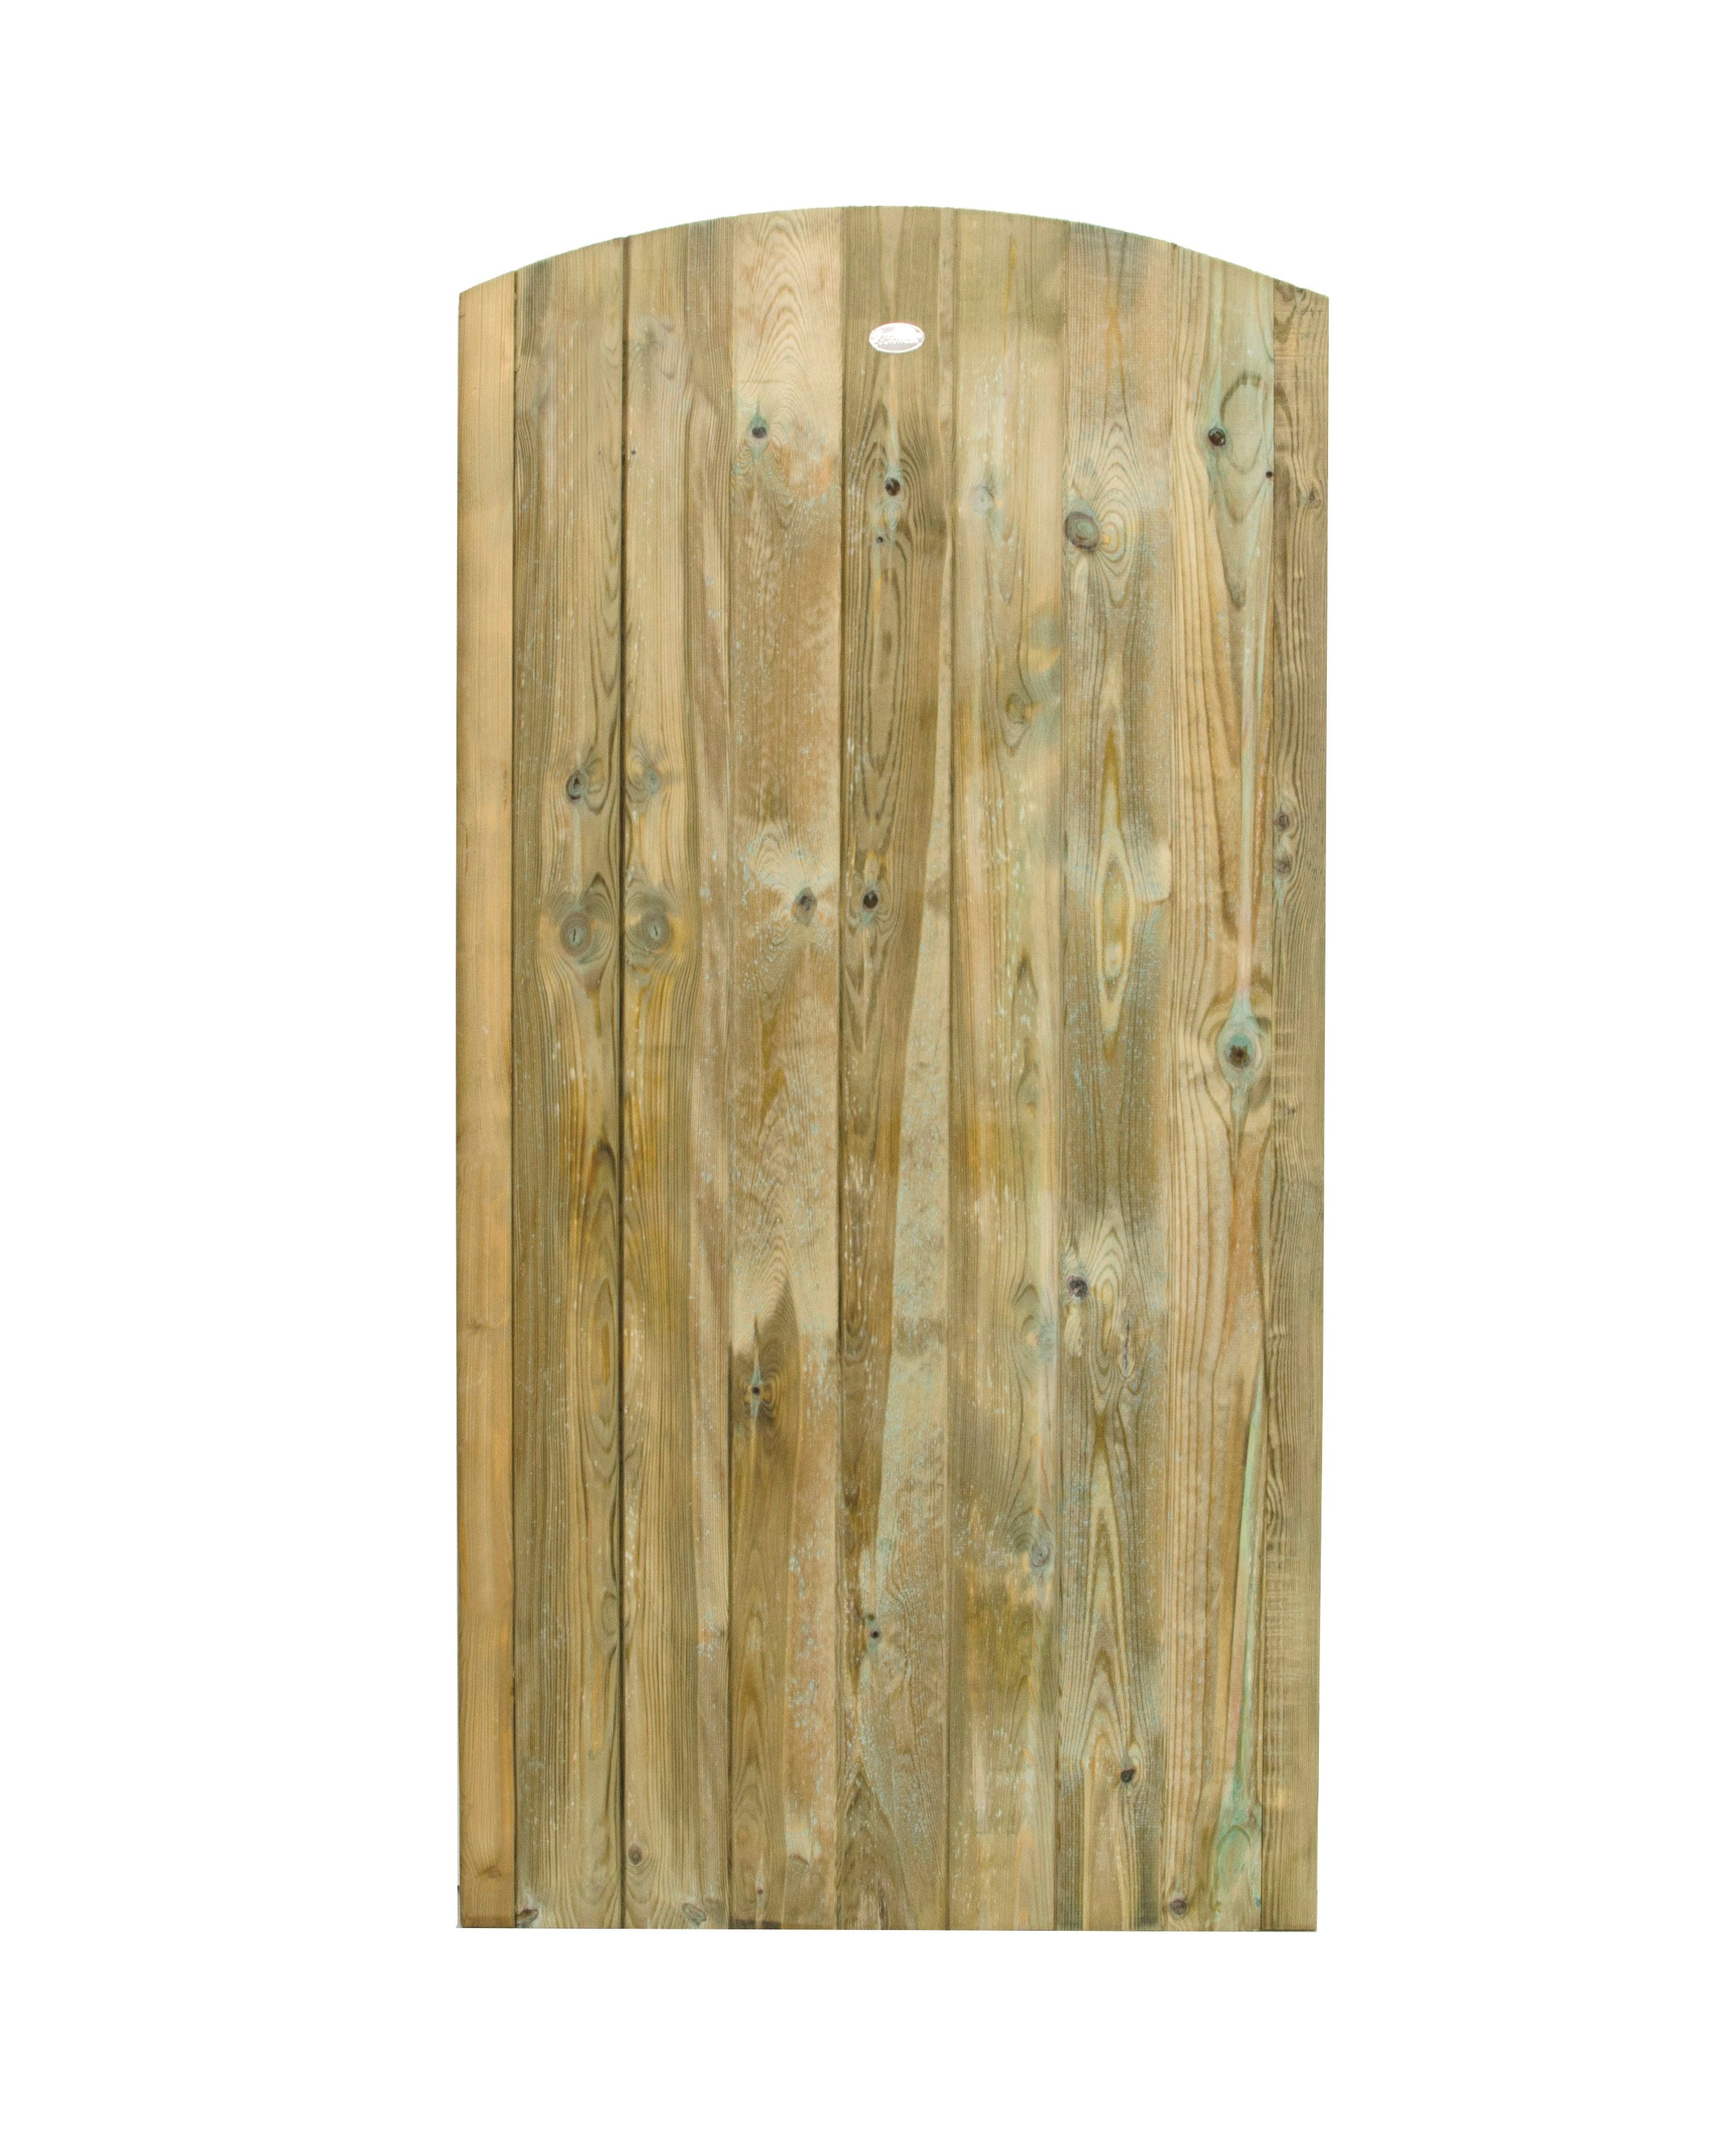 Forest Garden Pressure Treated Curved Top Timber Gate - 900 x 1800mm